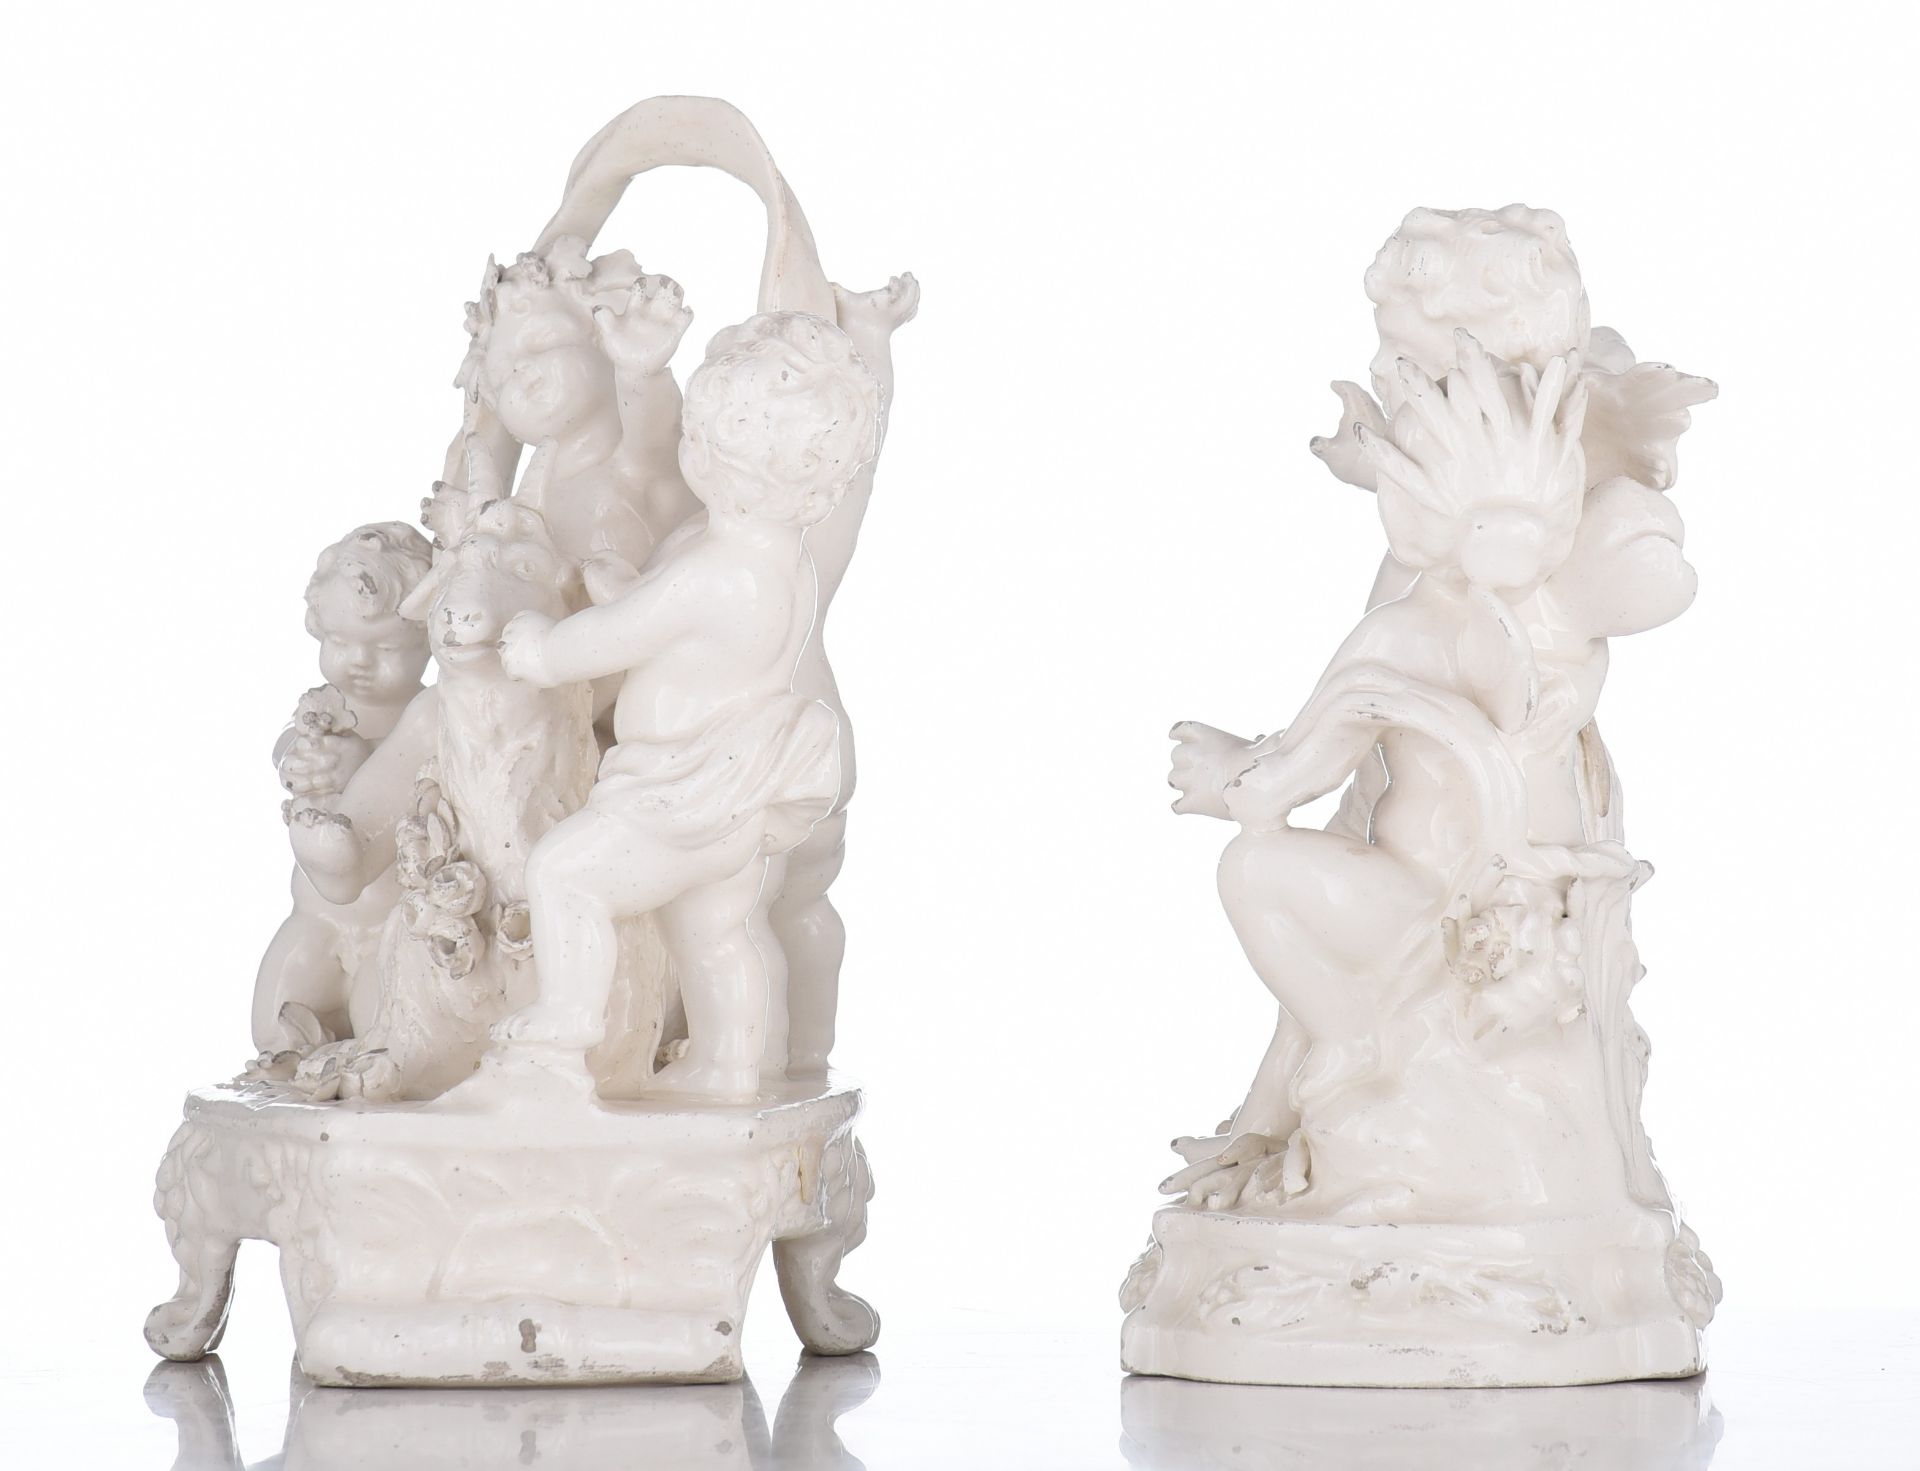 (BIDDING ONLY ON CARLOBONTE.BE) Two white glazed Capodimonte figural groups, Naples, H 20 - 23 cm - Image 3 of 16